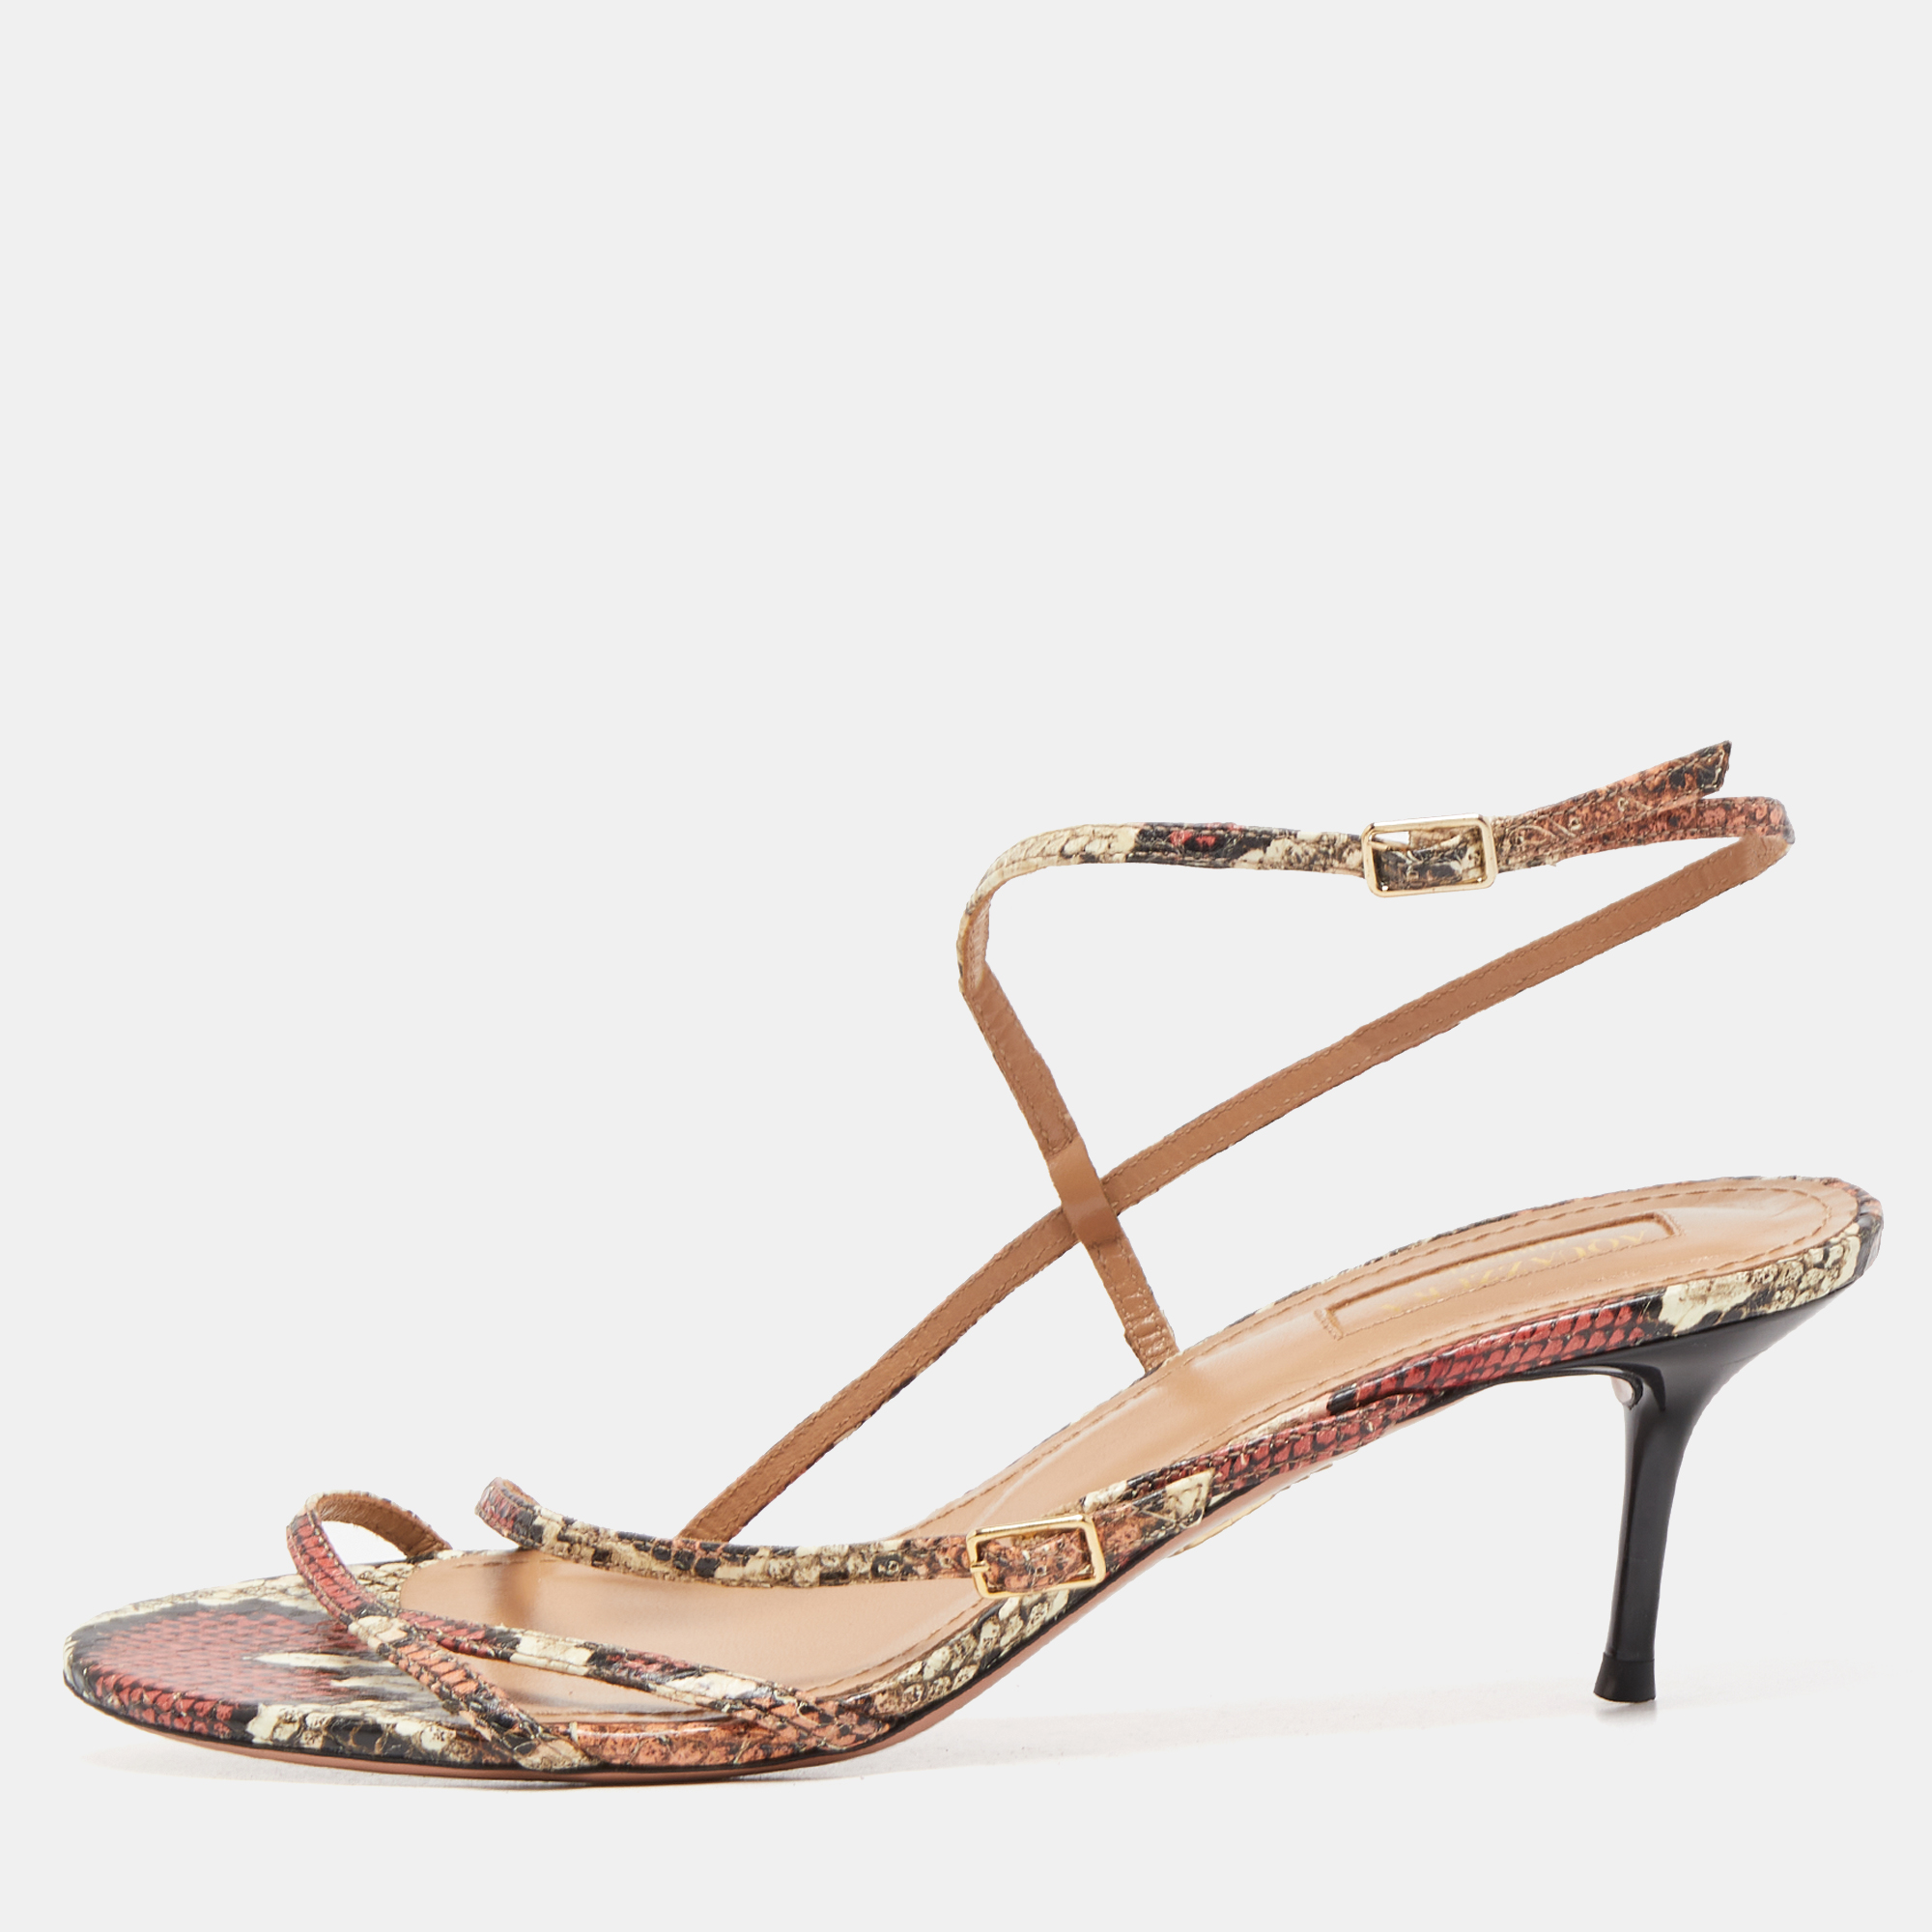 Pre-owned Aquazzura Multicolor Python Embossed Leather Carolyne Strappy Sandals Size 38